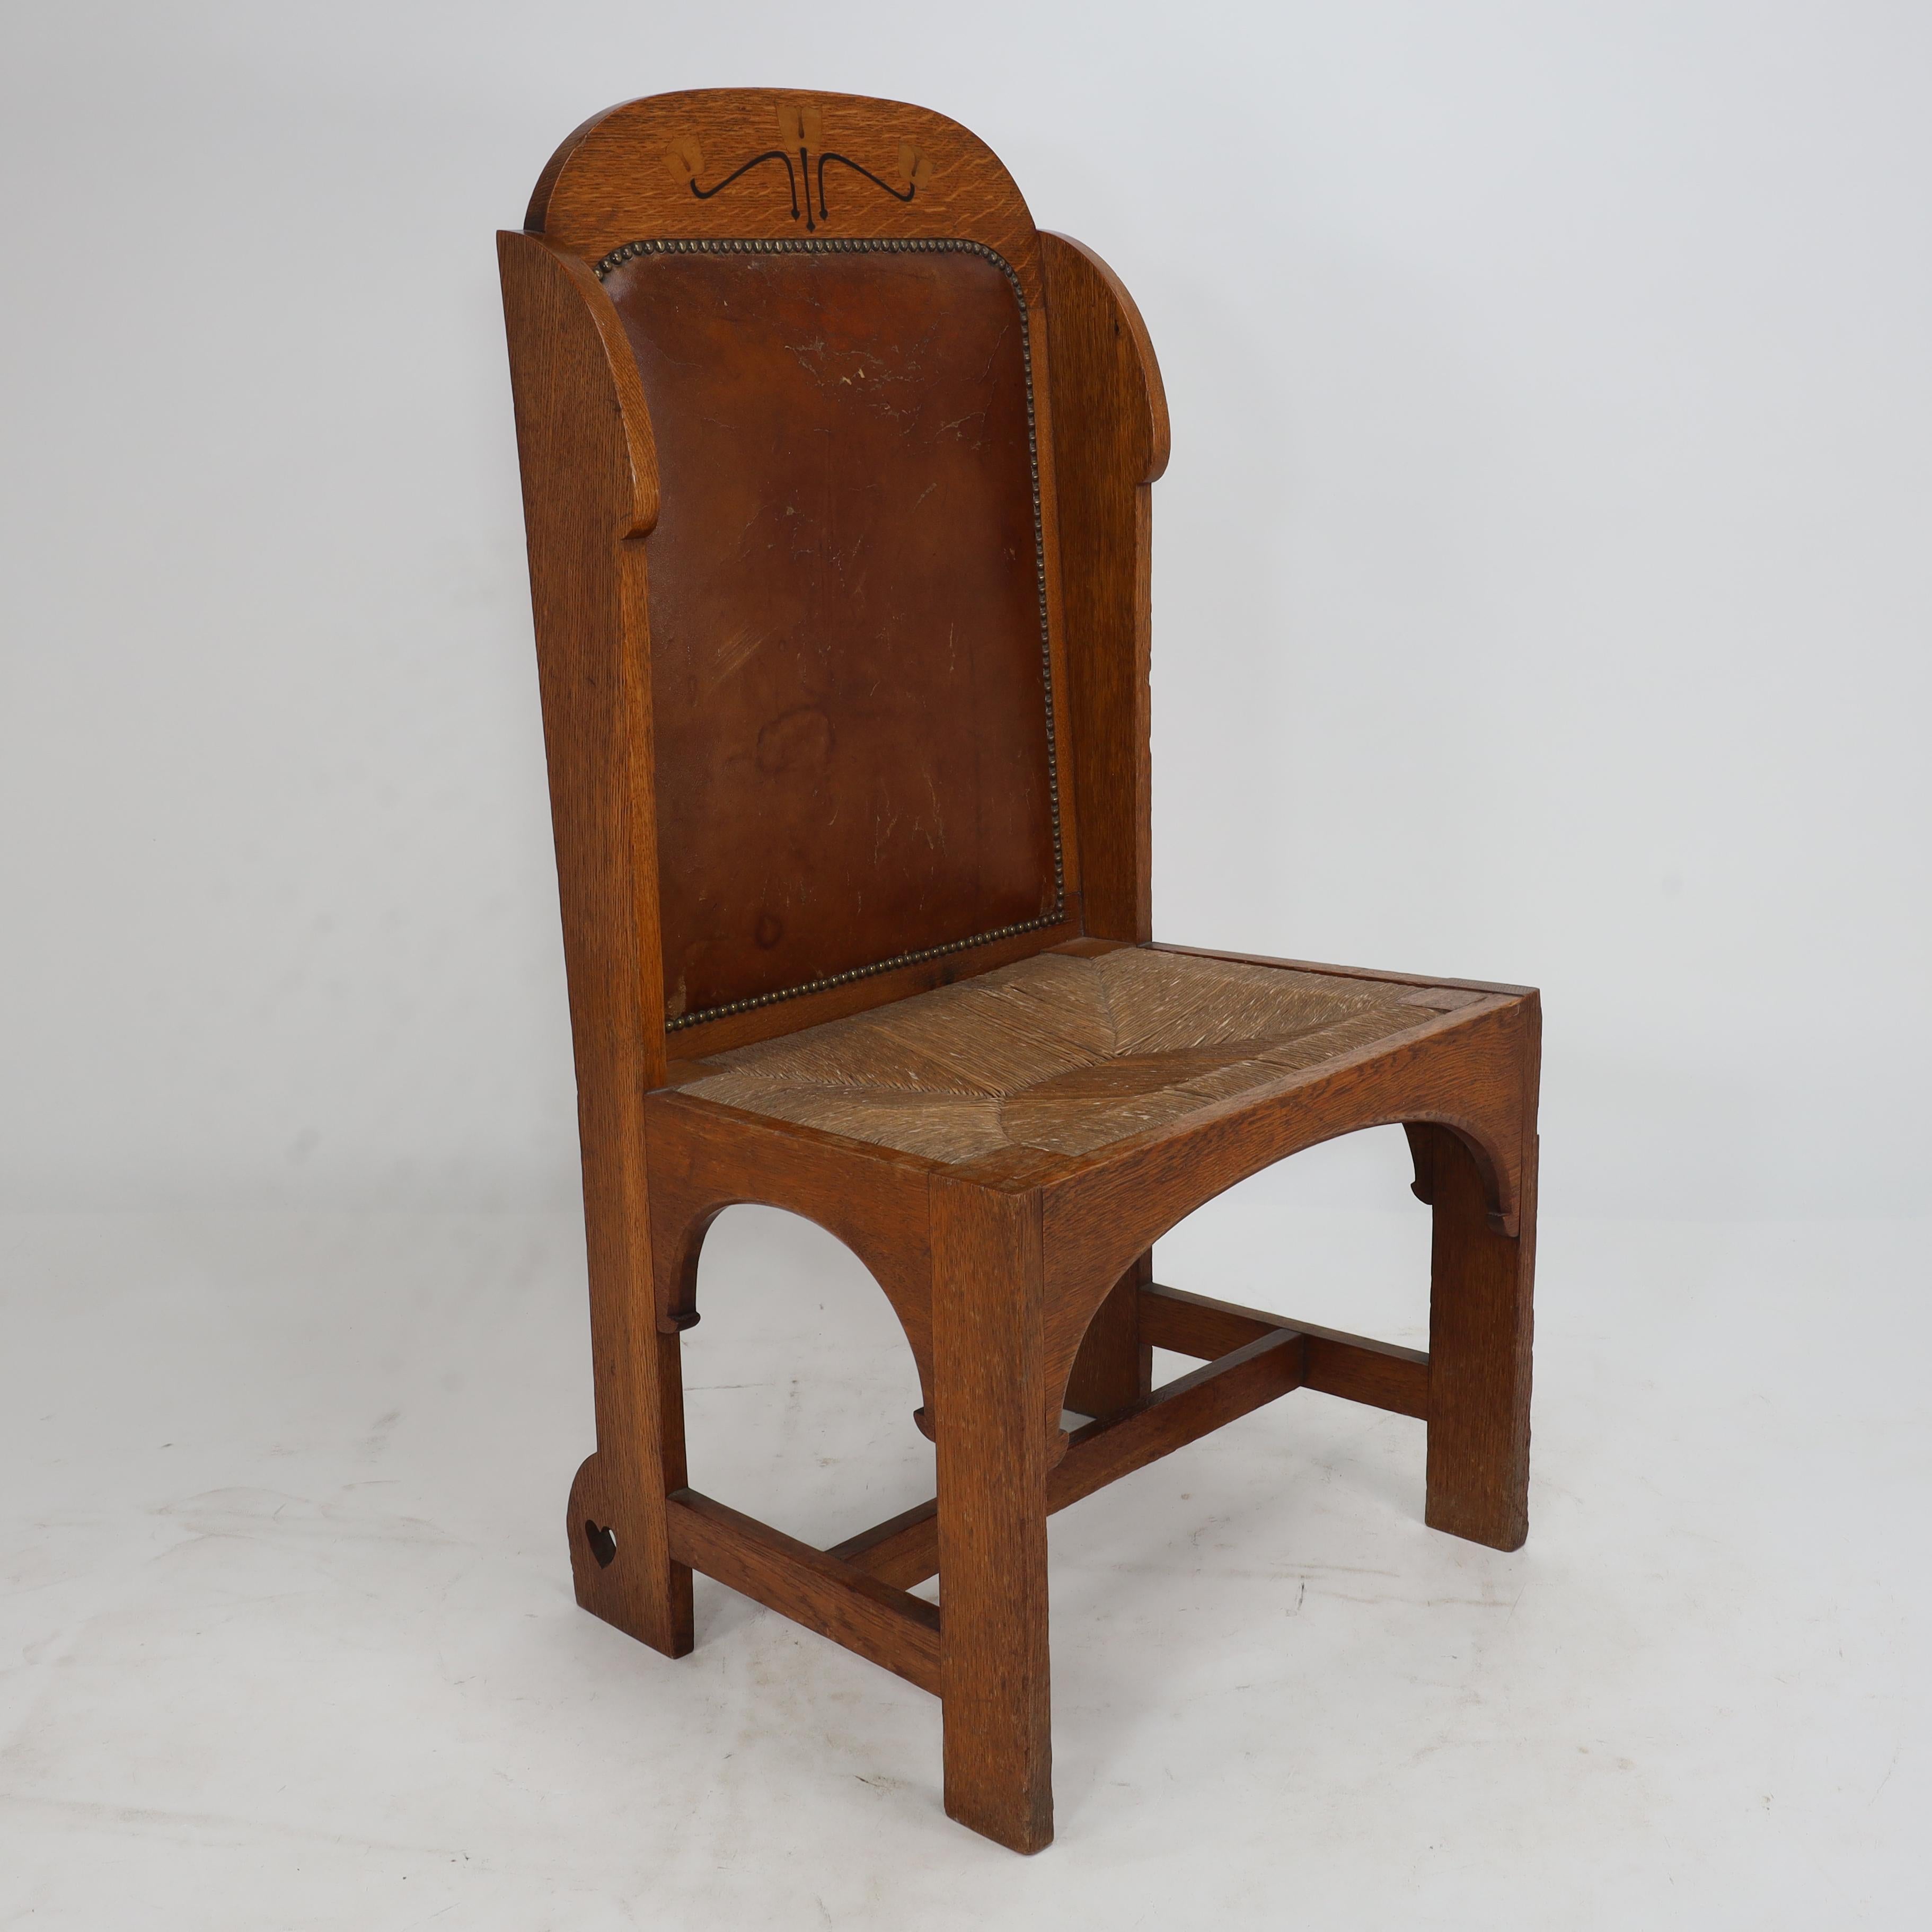 E G Punnet attributed. Probably made by William Birch and retailed by Goodyers of Regent Street. An Arts and Crafts oak wing back hall chair using flat sided construction. The head rest inlaid with sycamore tulips on ebonised stems ending with tiny